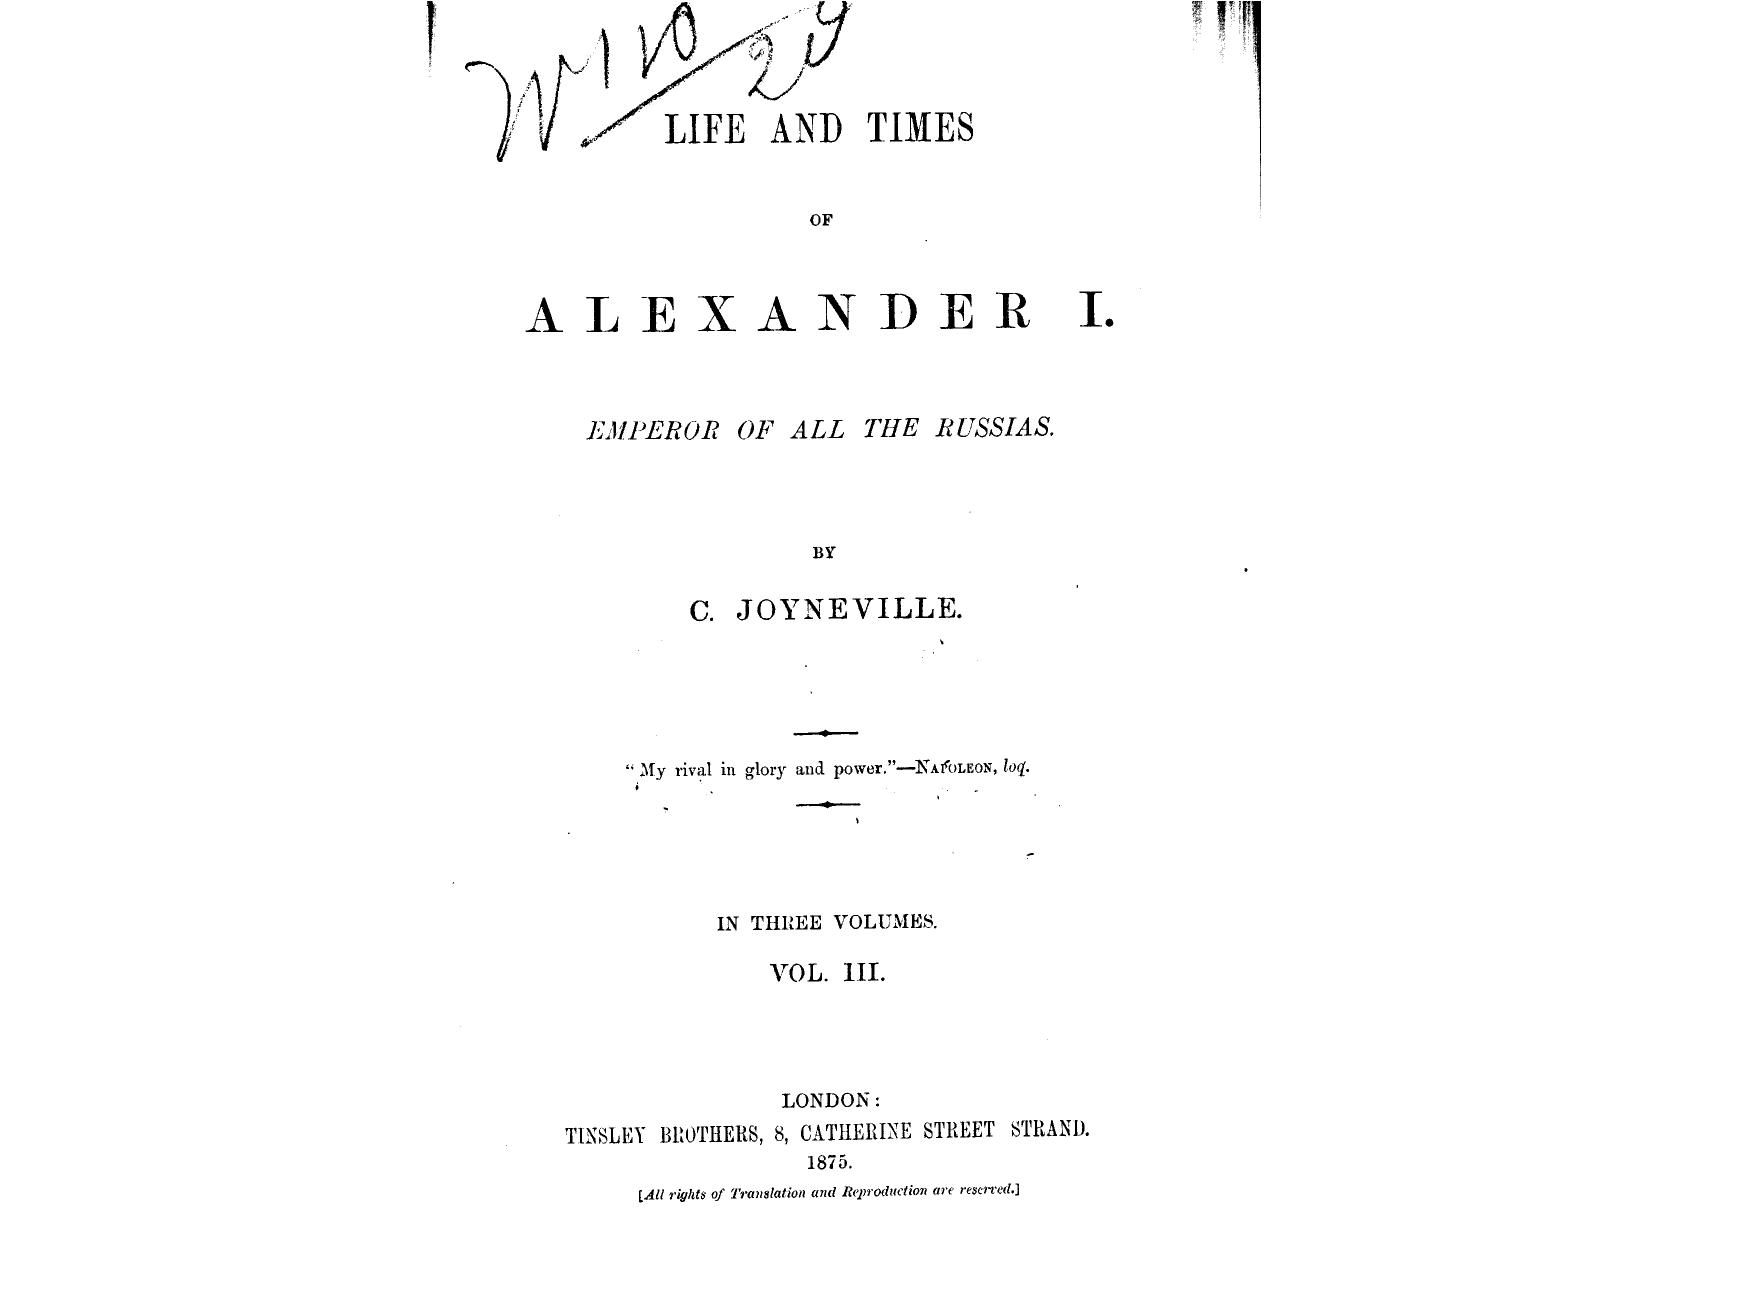 BY C. Joyneville - Life and times of alexander i., emperor of all the russias  . vol. 3 by 1875